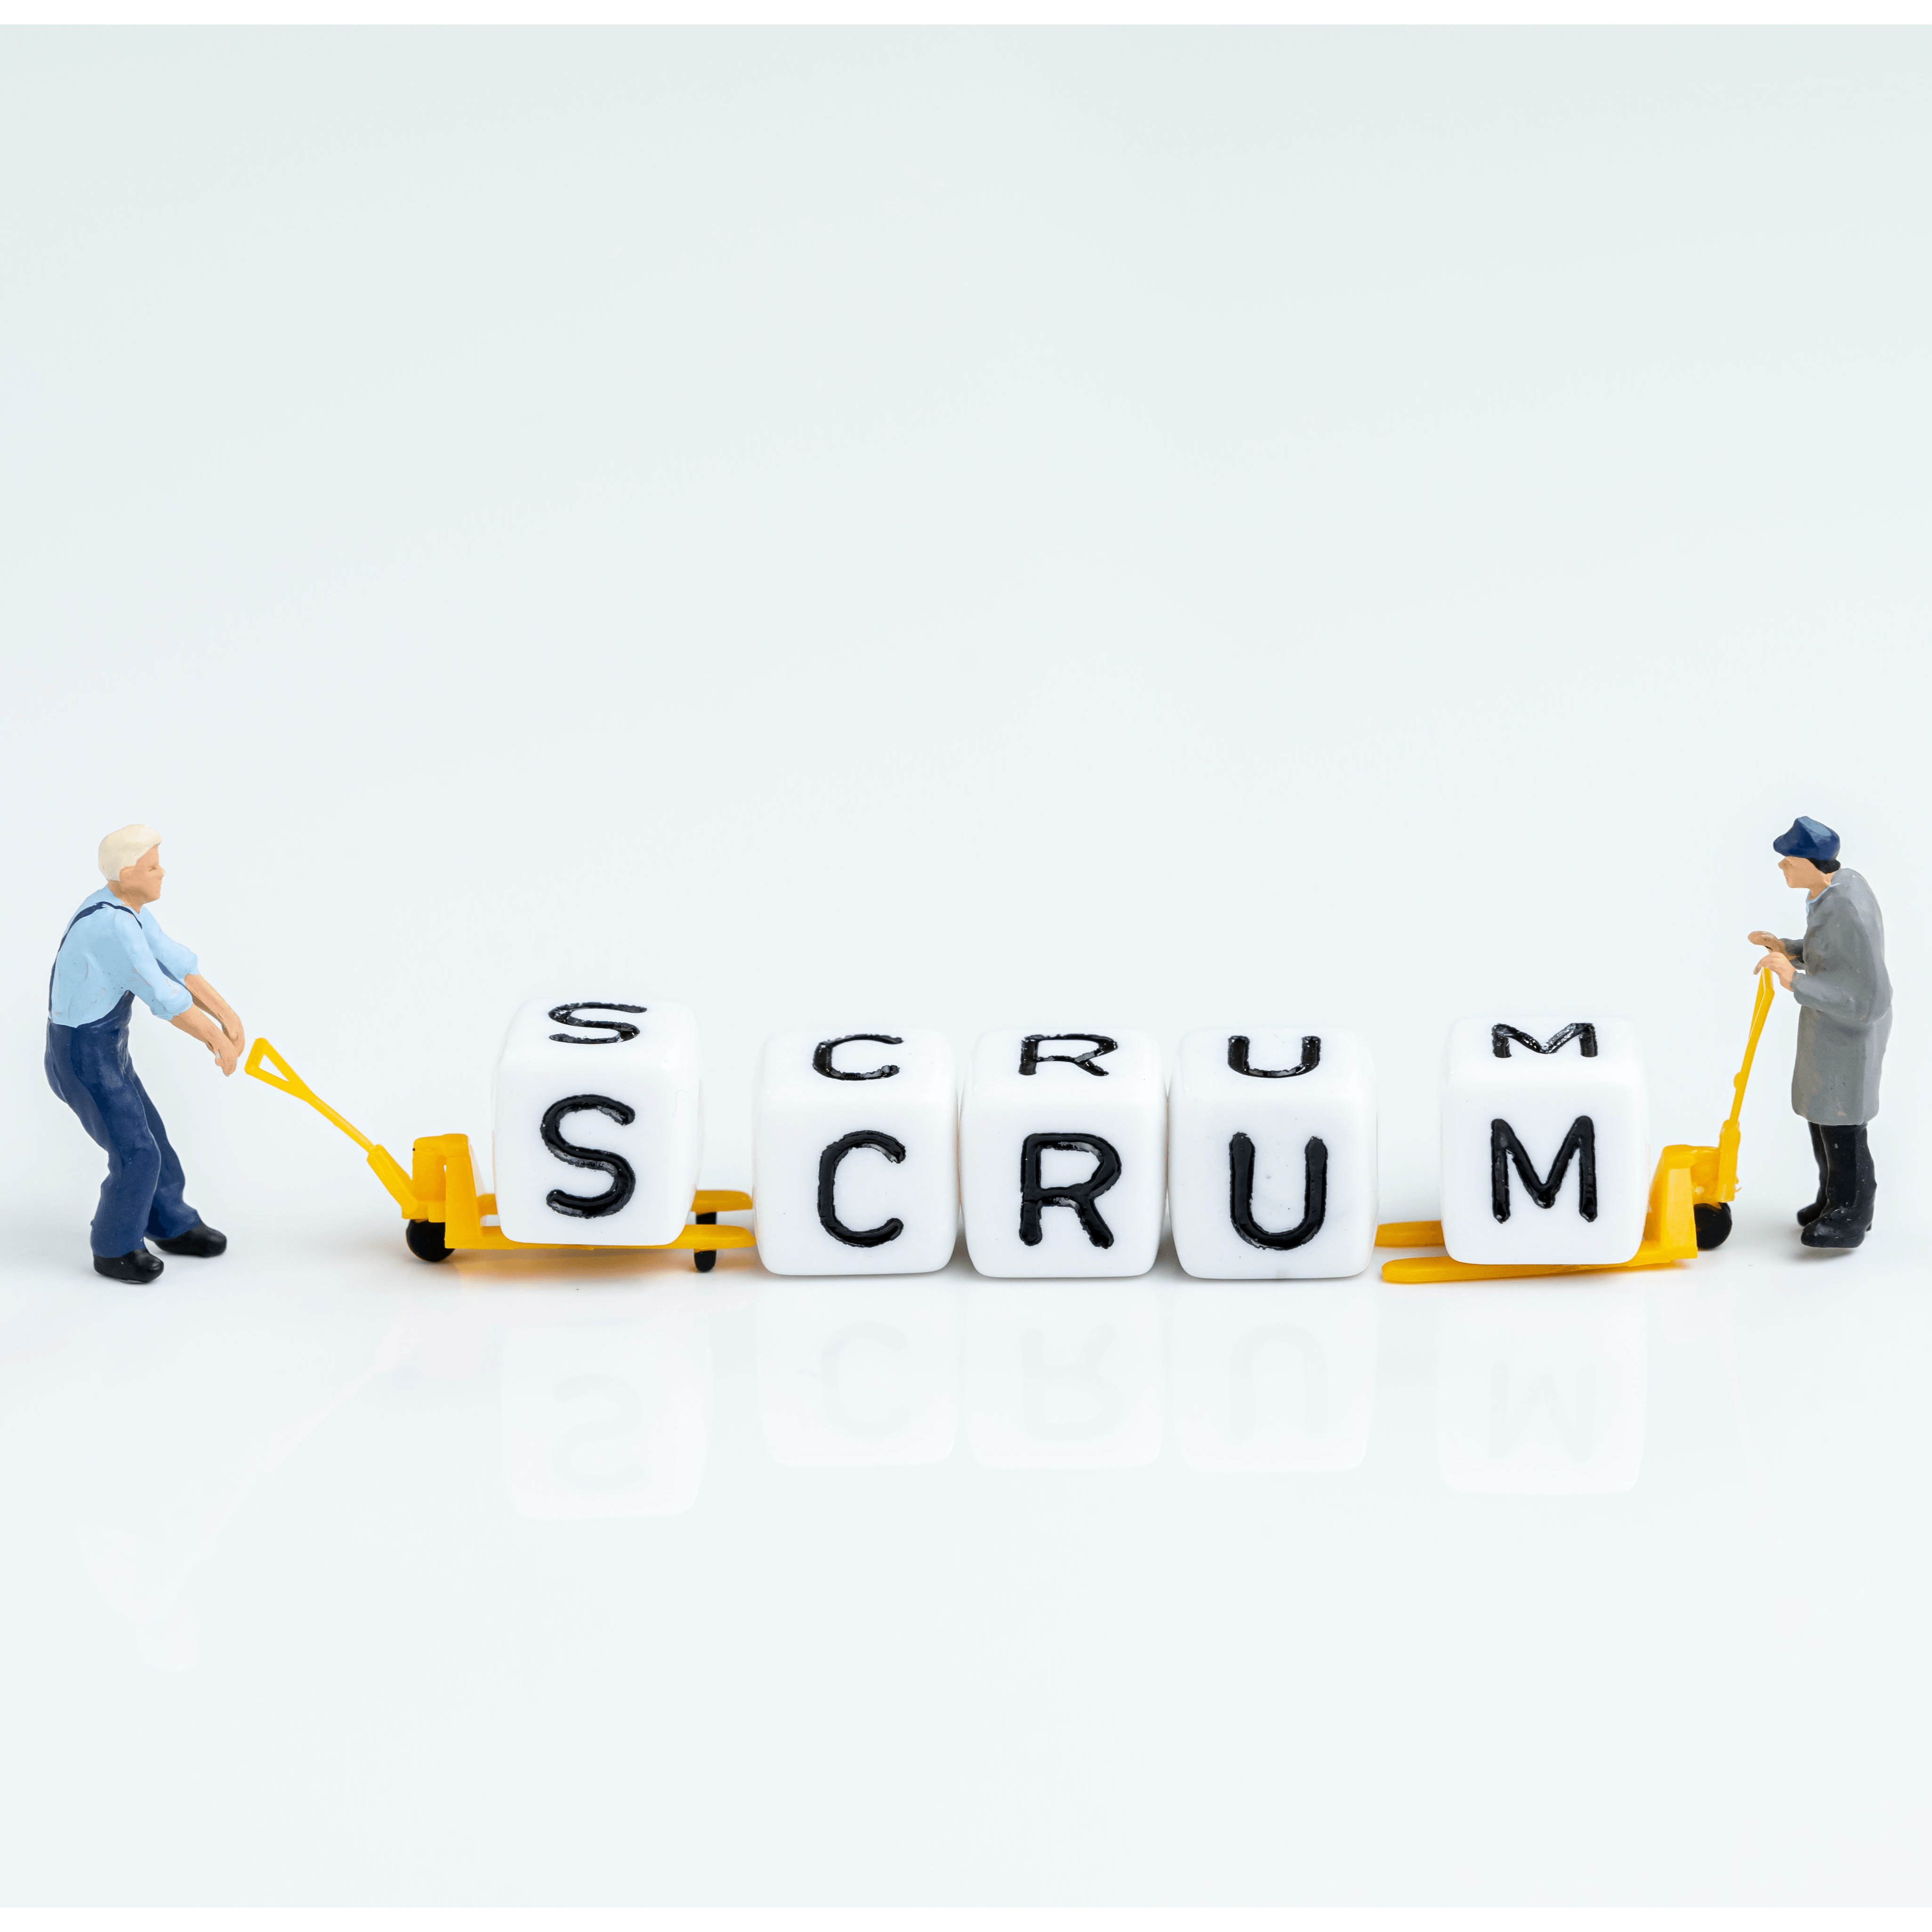 Scrum Foundations training by why academy!: learn the essential concepts of Agile through implementation of Scrum method